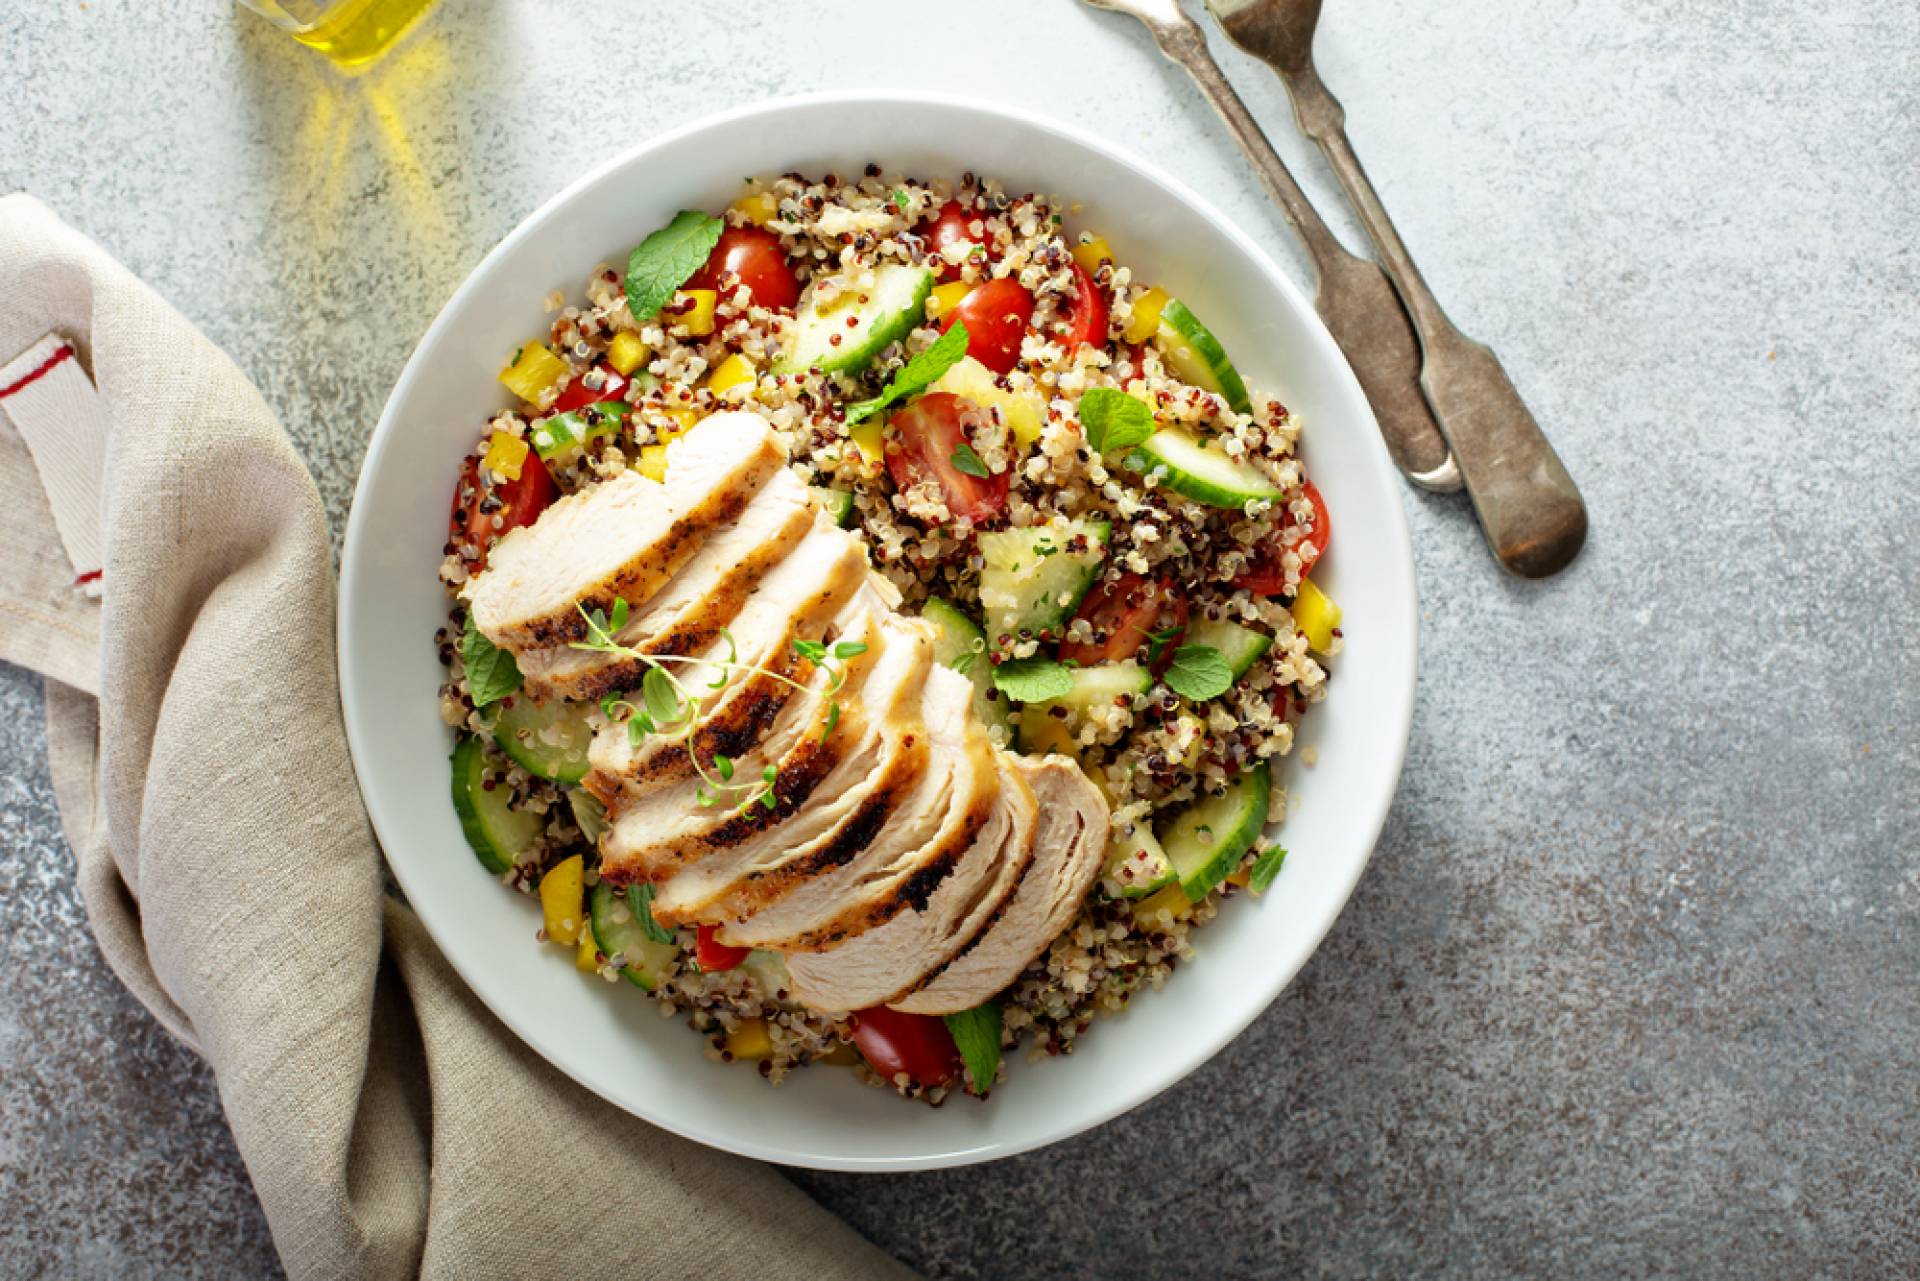 Whole30 Grilled Chicken with Tabbouleh Salad